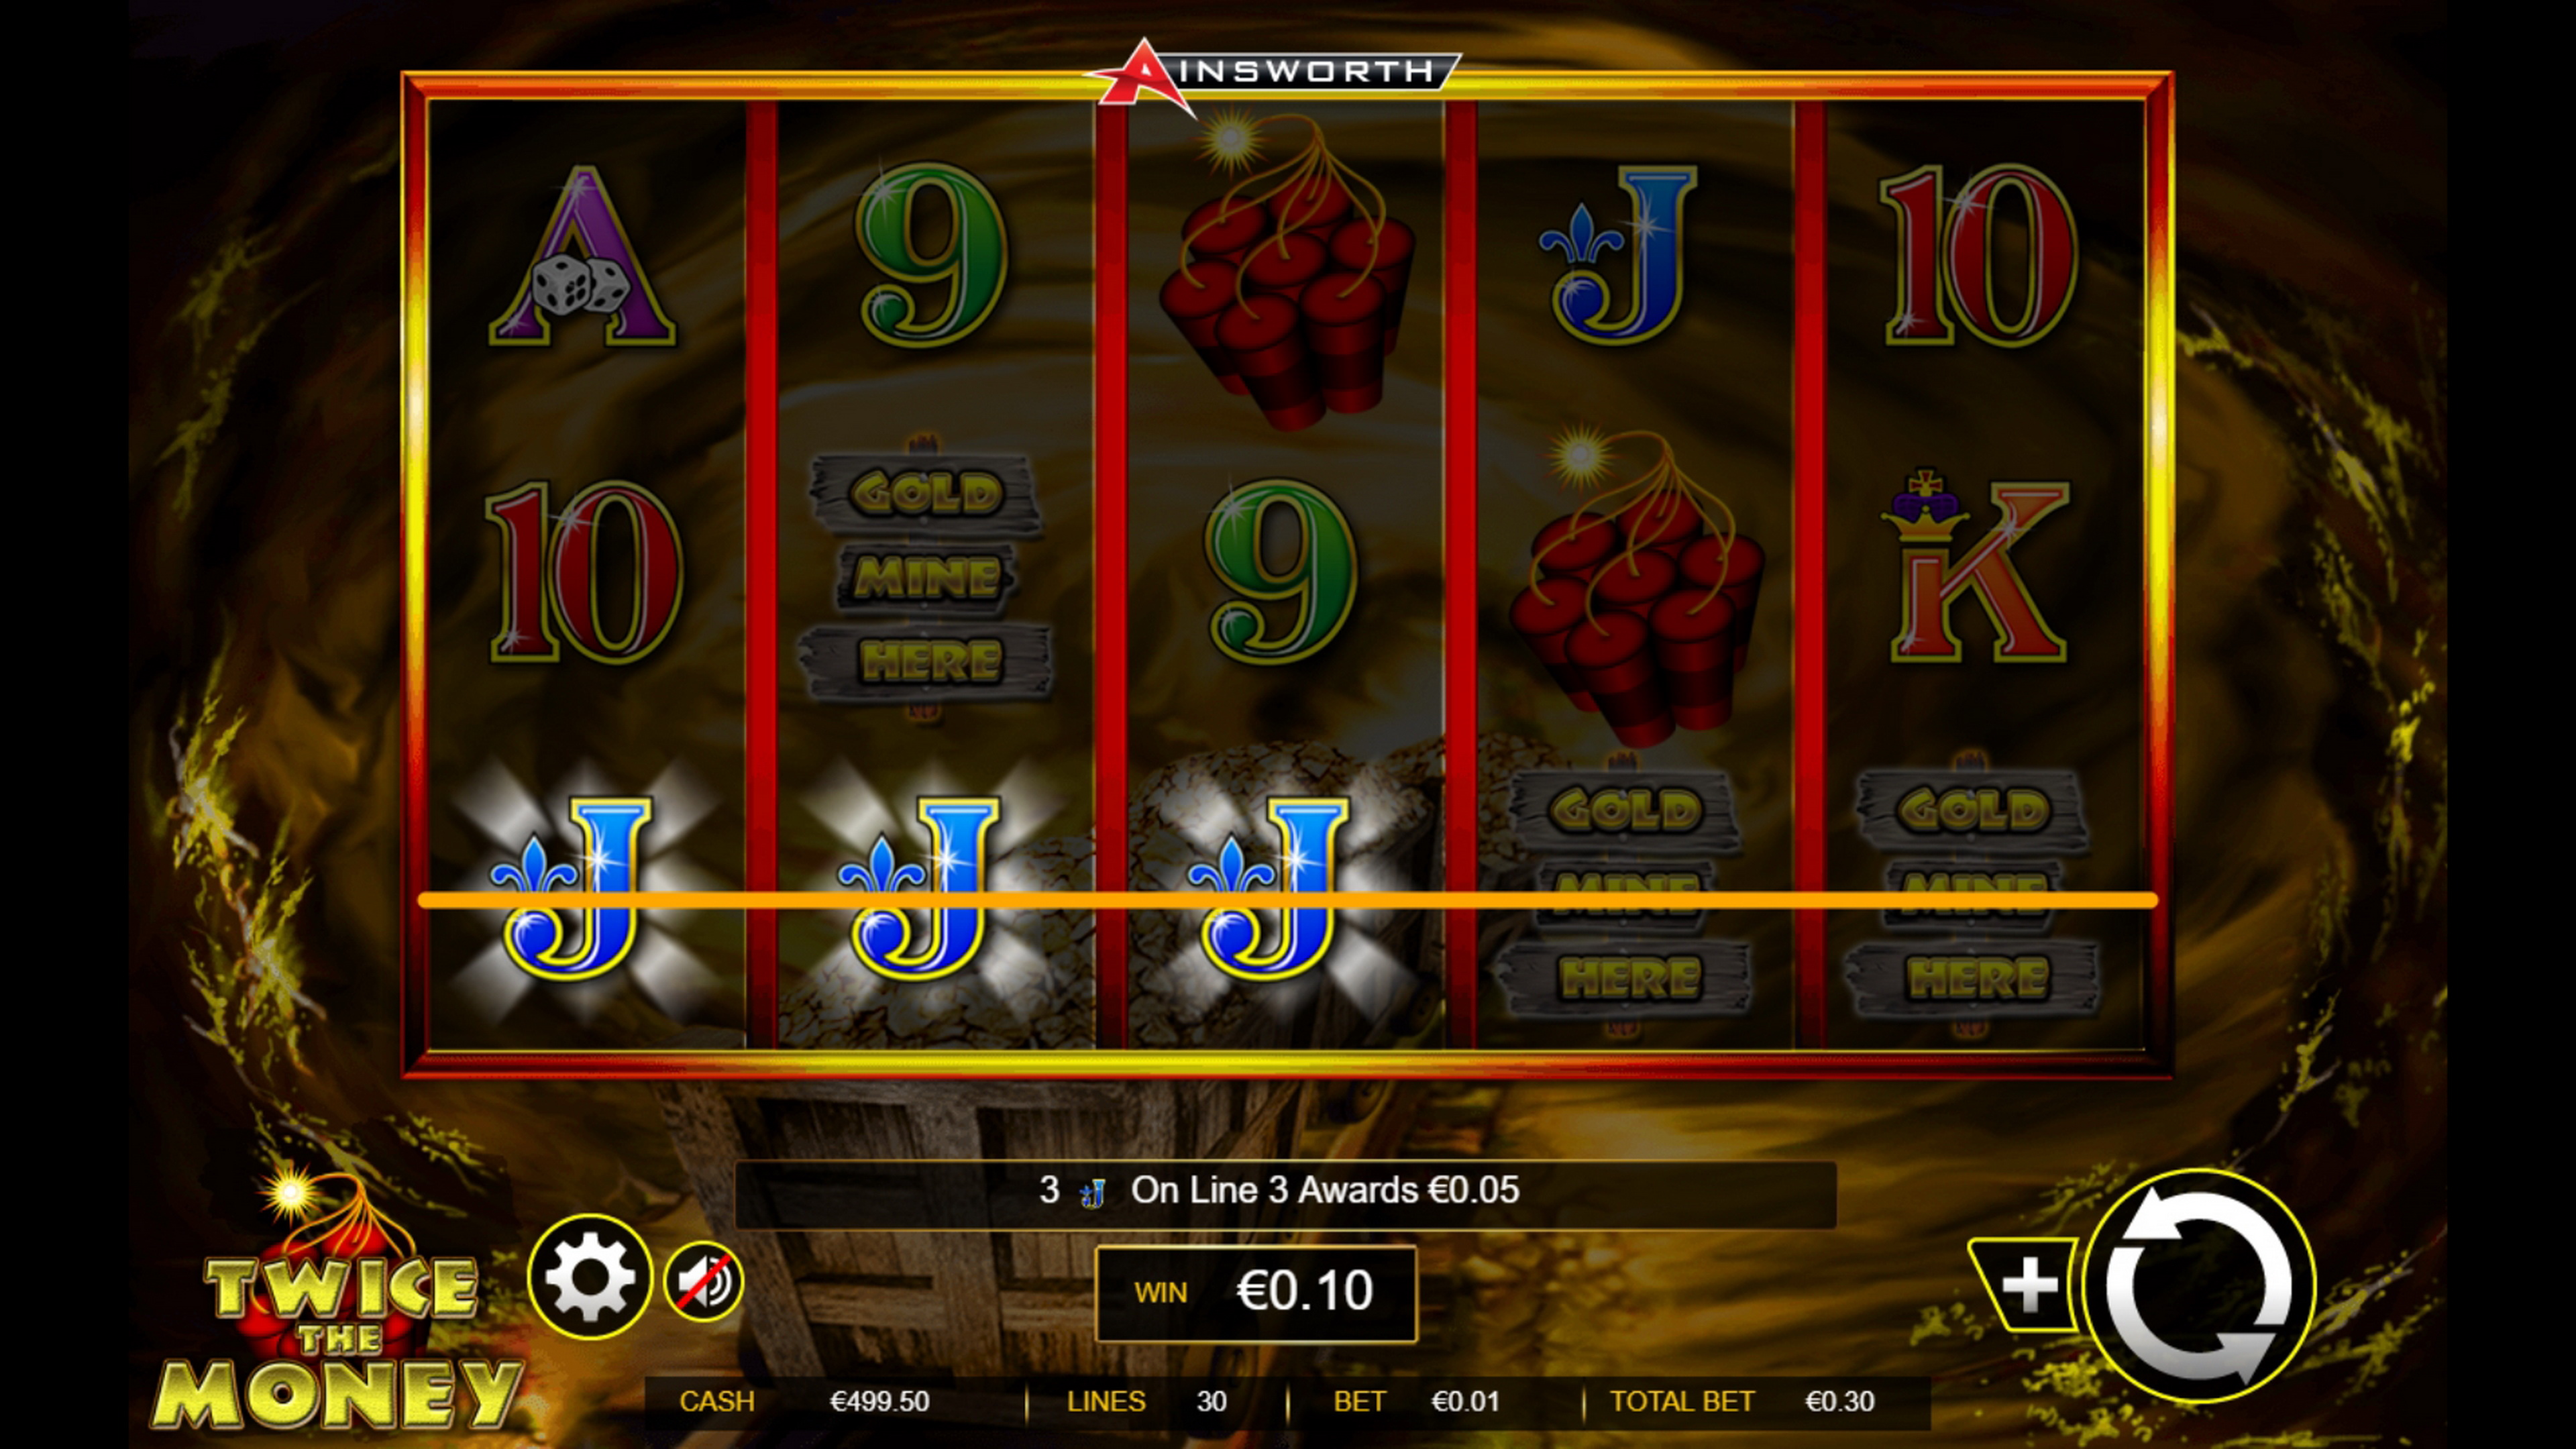 Win Money in Twice The Money Free Slot Game by Ainsworth Gaming Technology